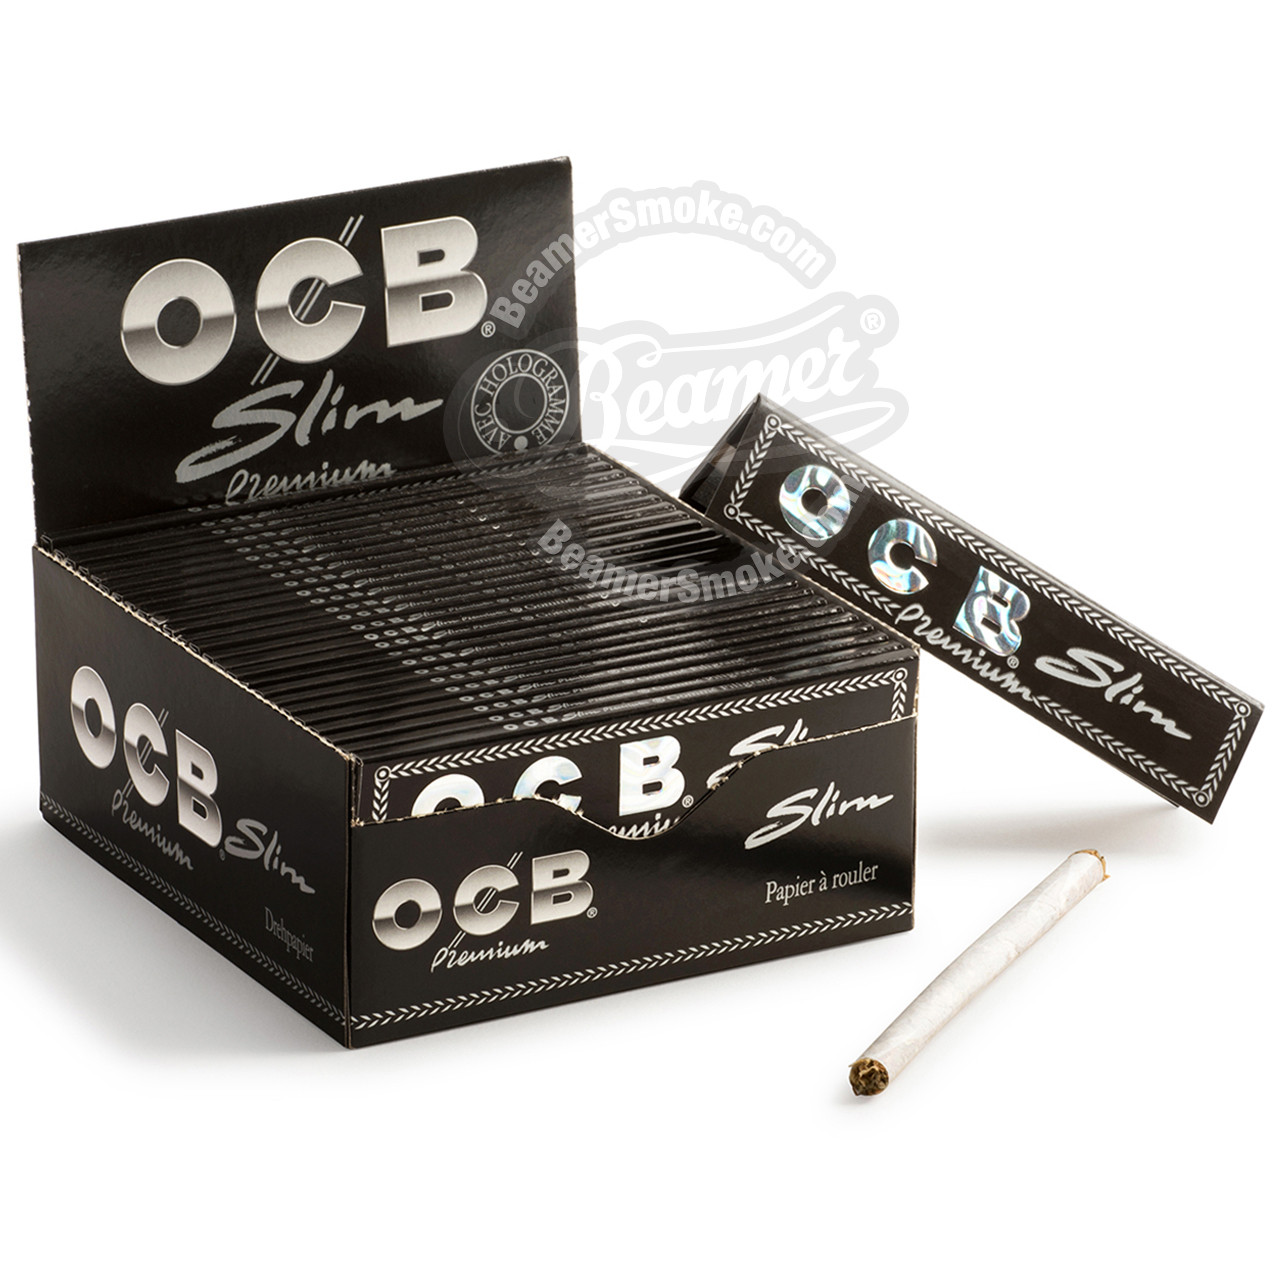 OCB Slim Premium Rolls King Size with Filter Tips - The Drug Store